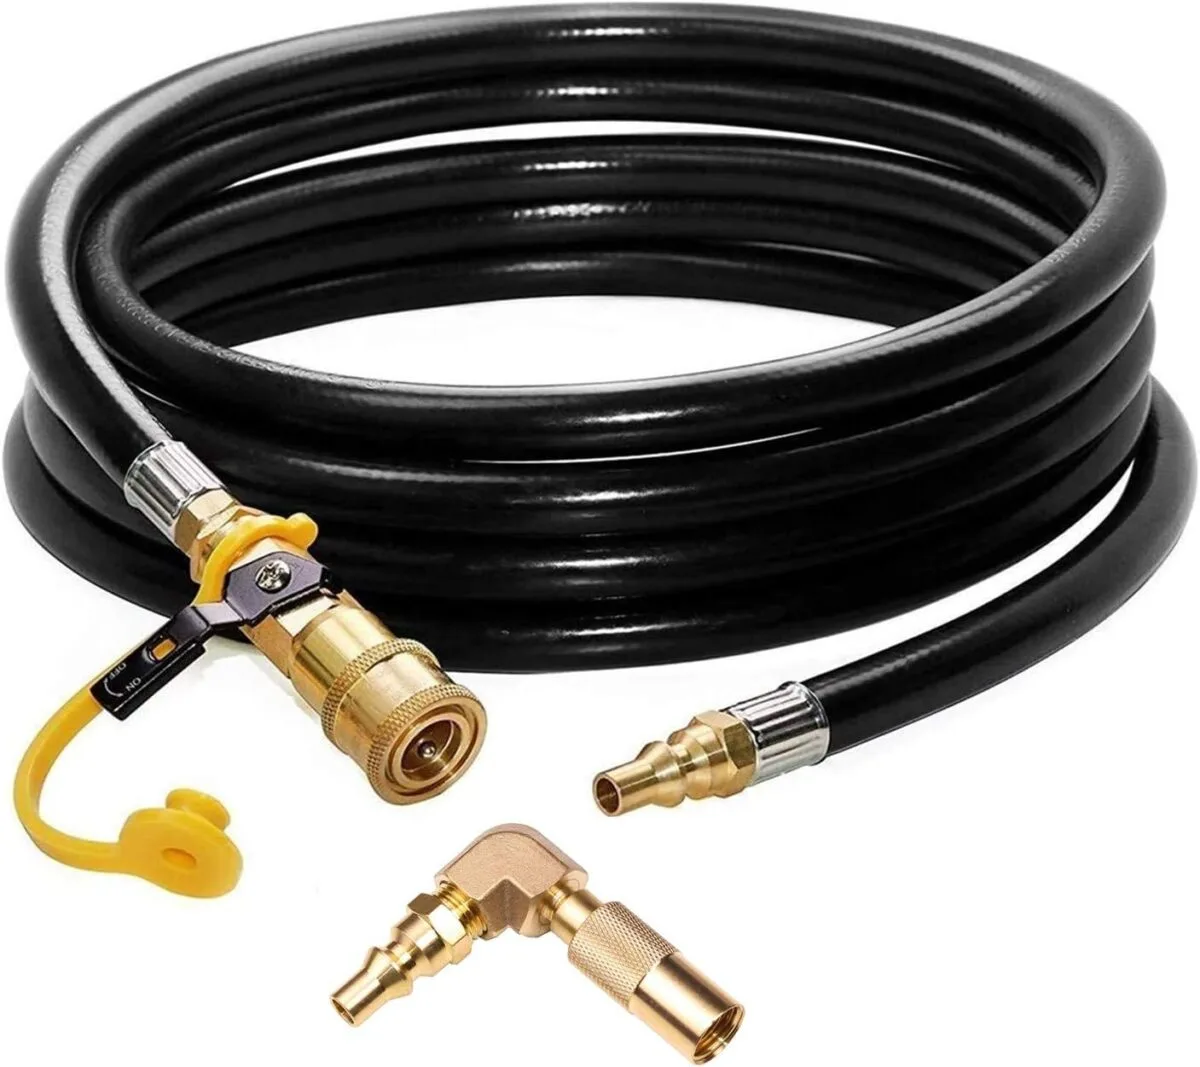 12 foot quick connect RV gas hose